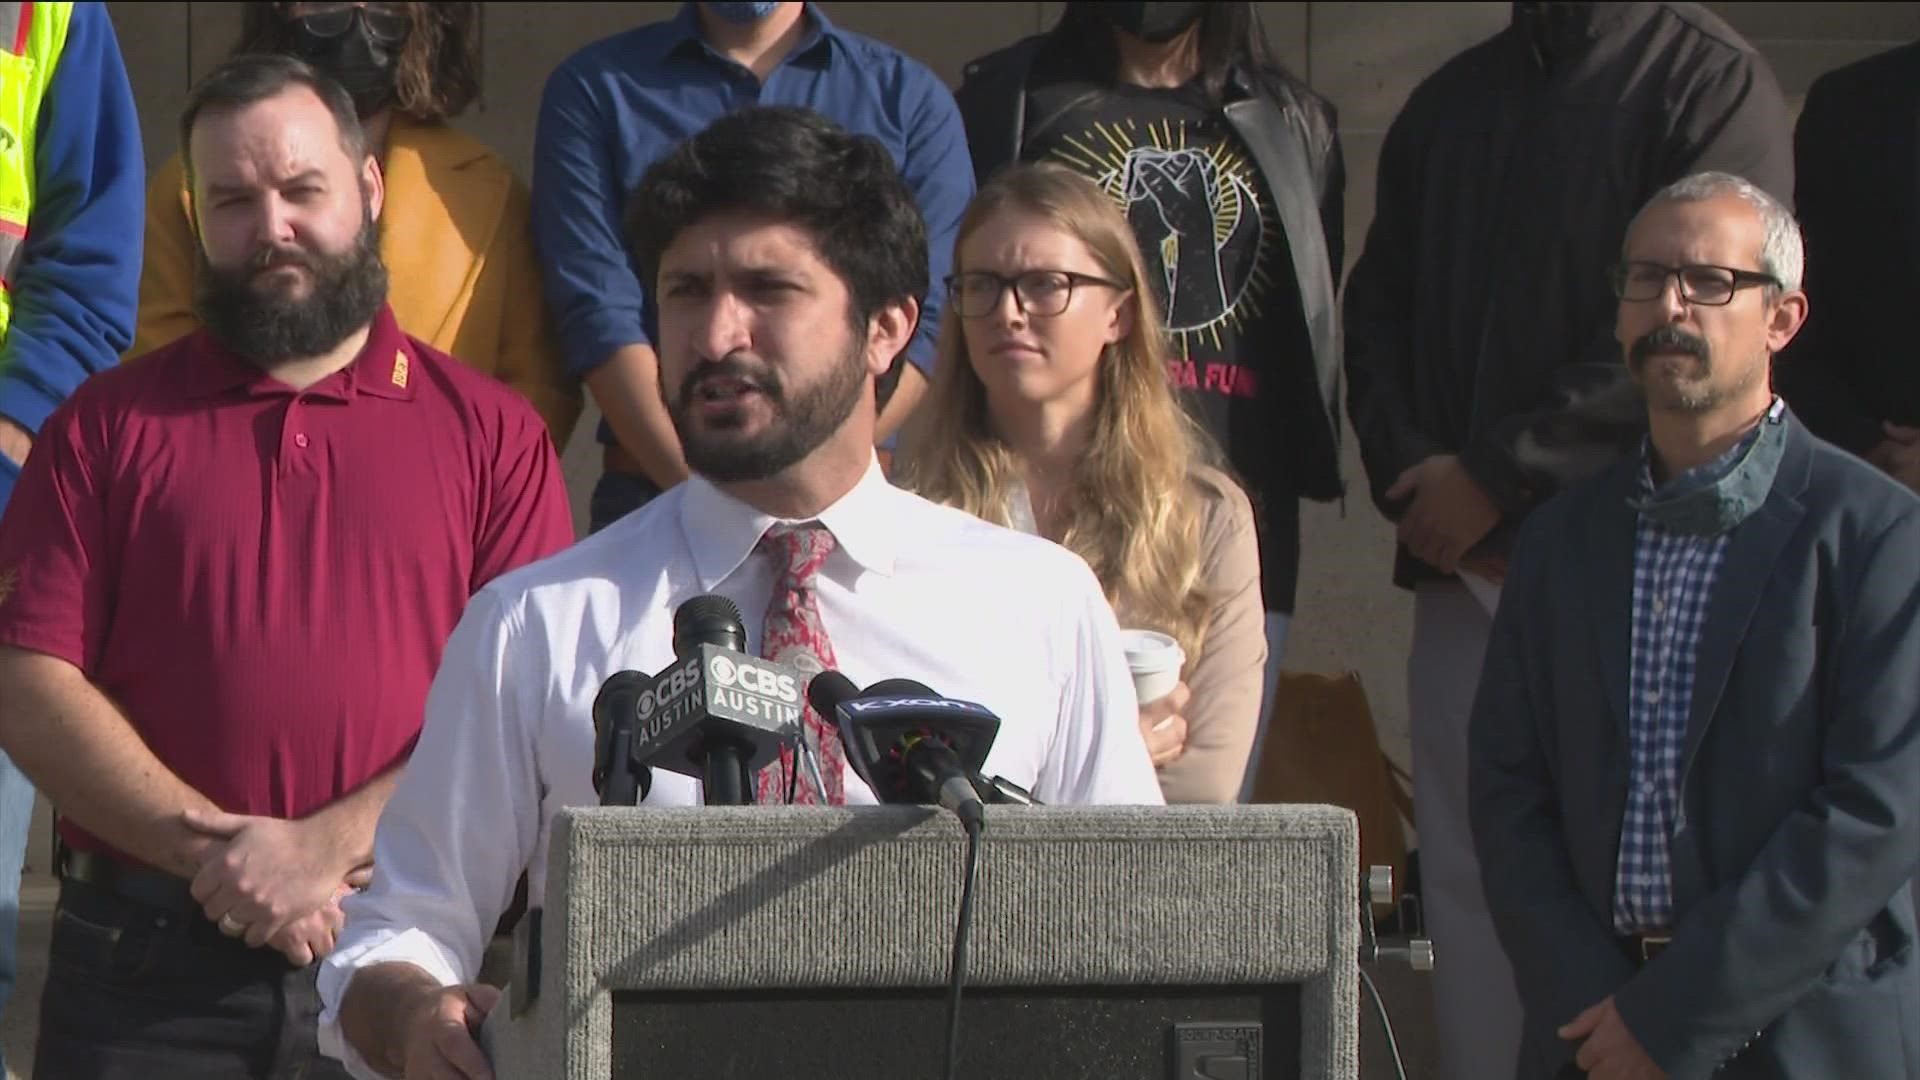 Casar, a former Austin City Council member, is hoping to tackle "the real problems people are facing" within Austin and Texas.